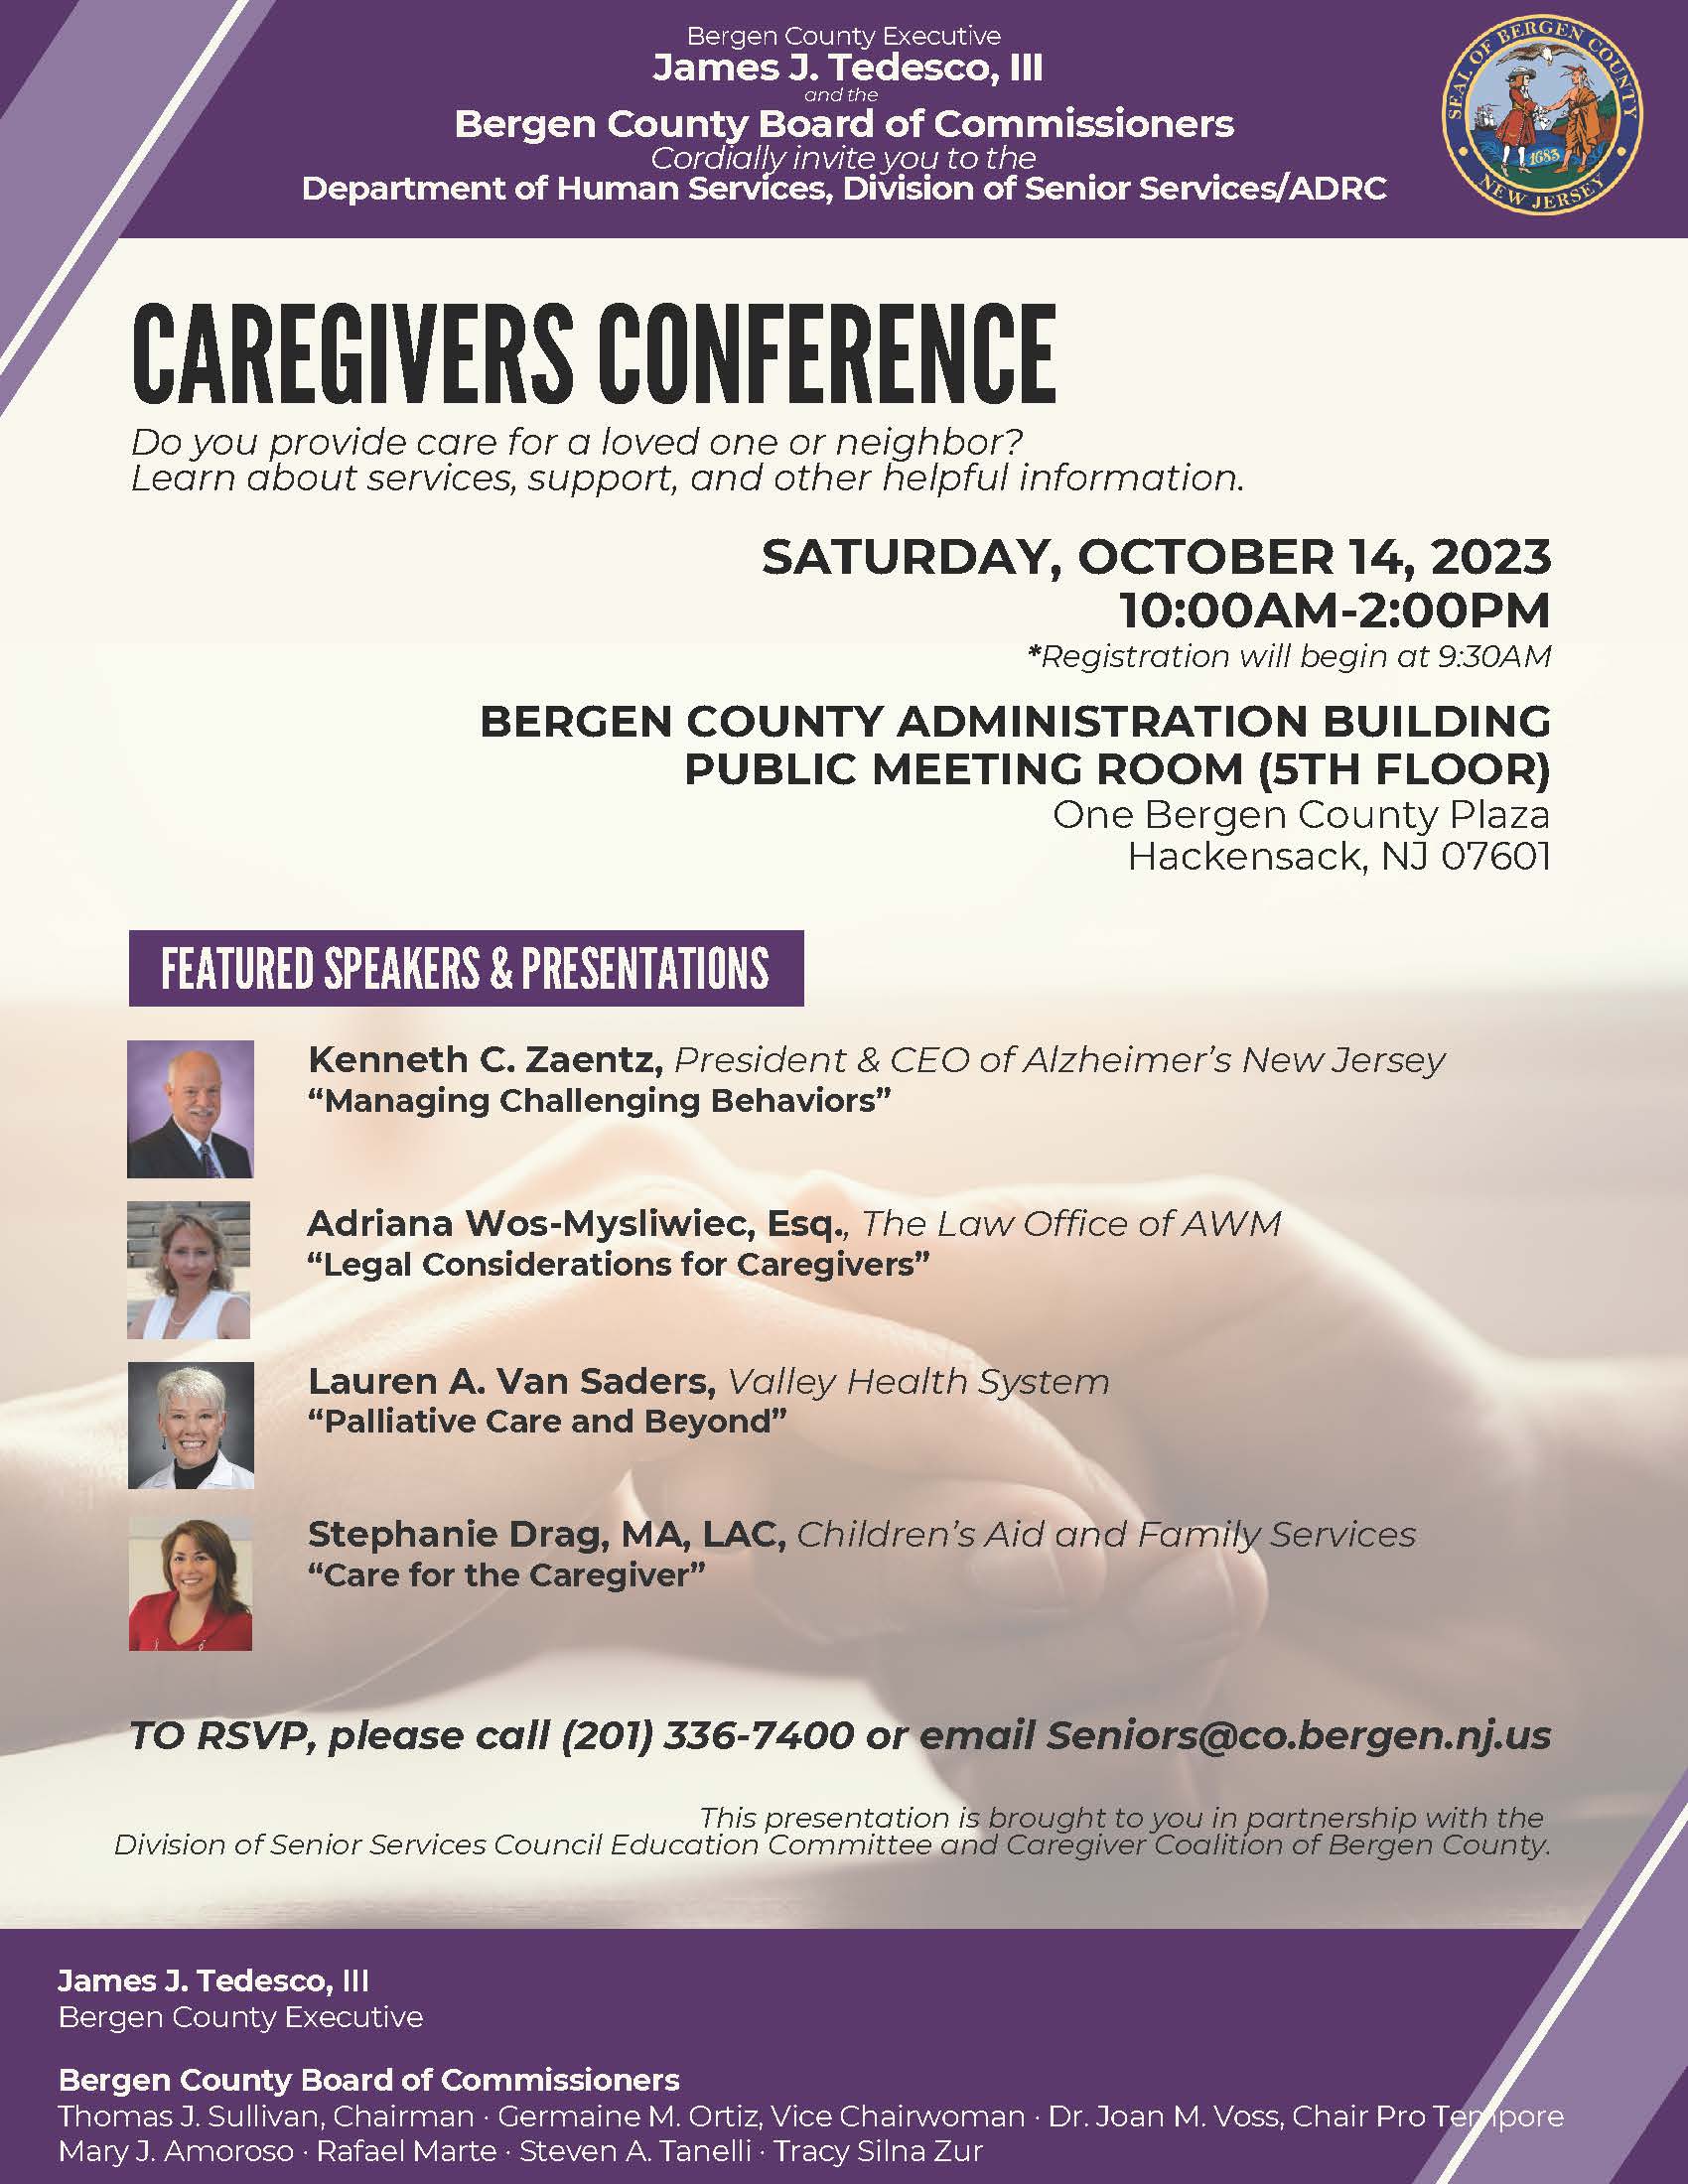 Fall Caregivers Conference